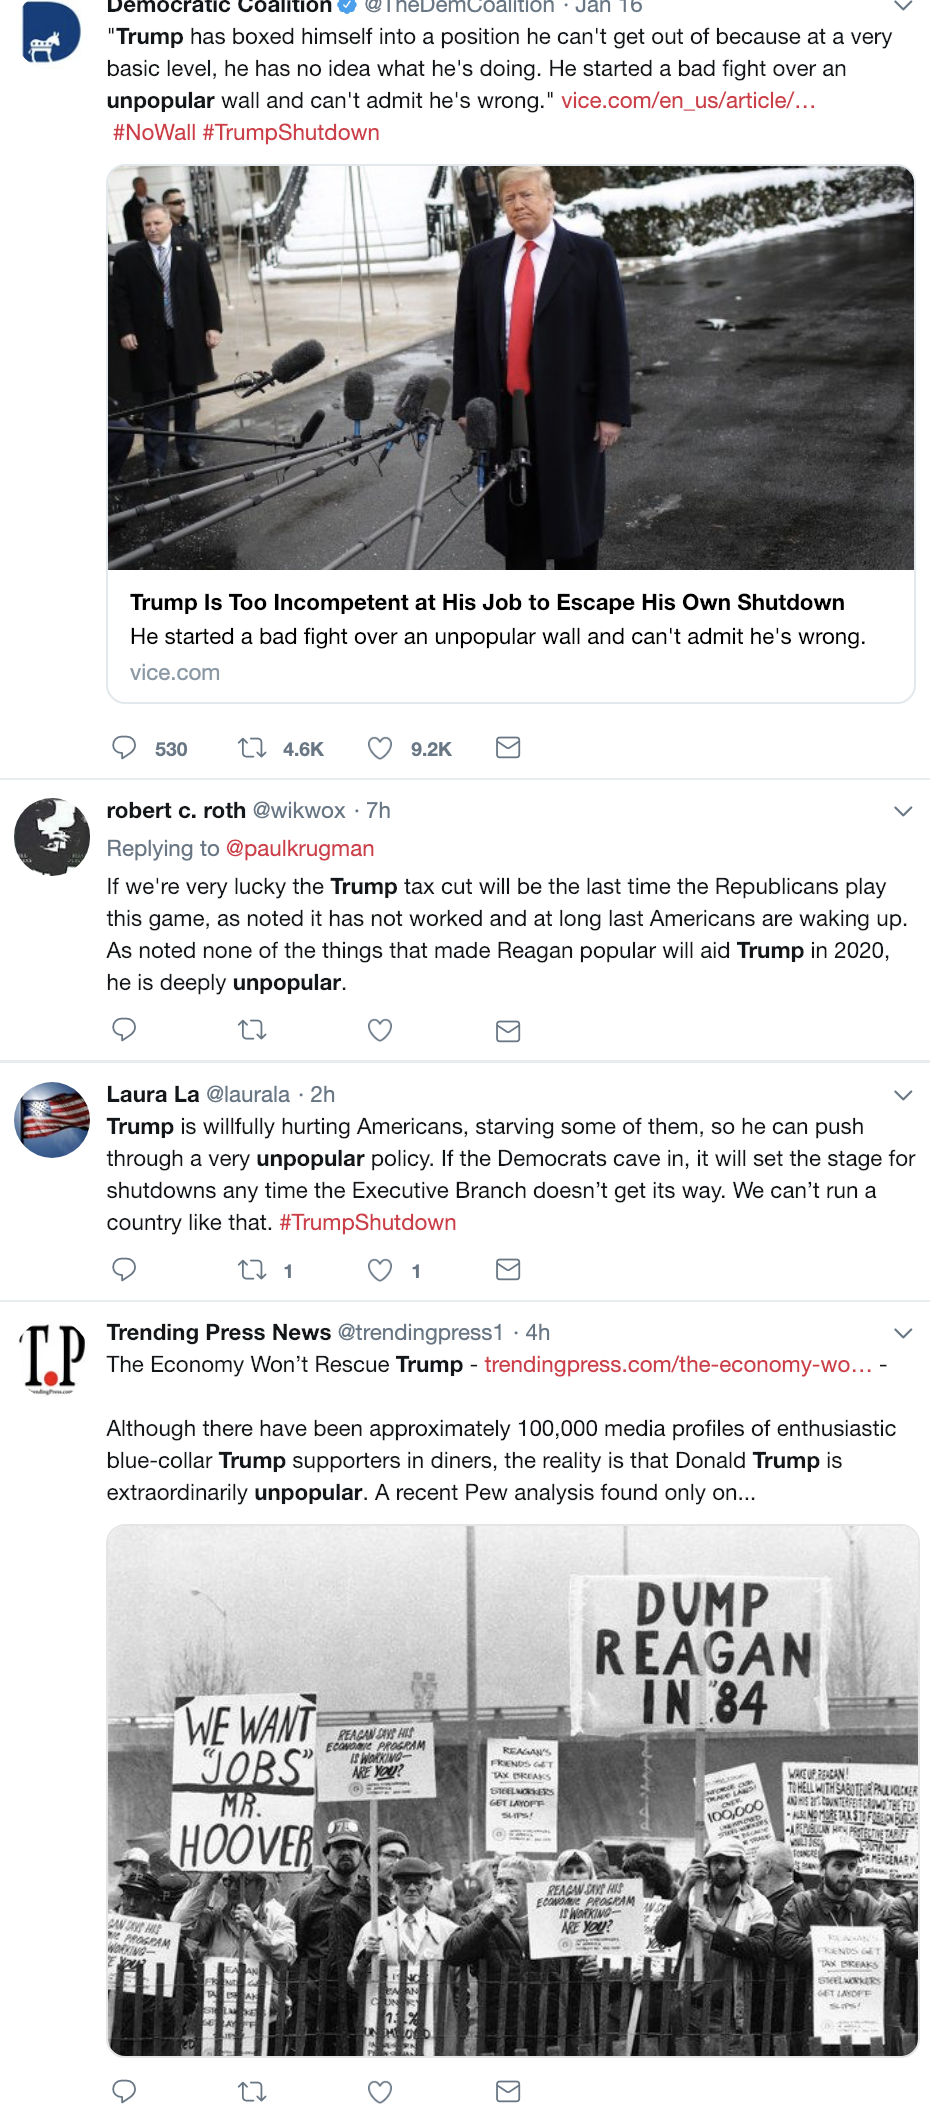 Screen-Shot-2019-01-22-at-3.03.40-PM New Public Policy Poll Results Released & The Numbers Have Trump Spazzing Corruption Crime Donald Trump Politics Top Stories 